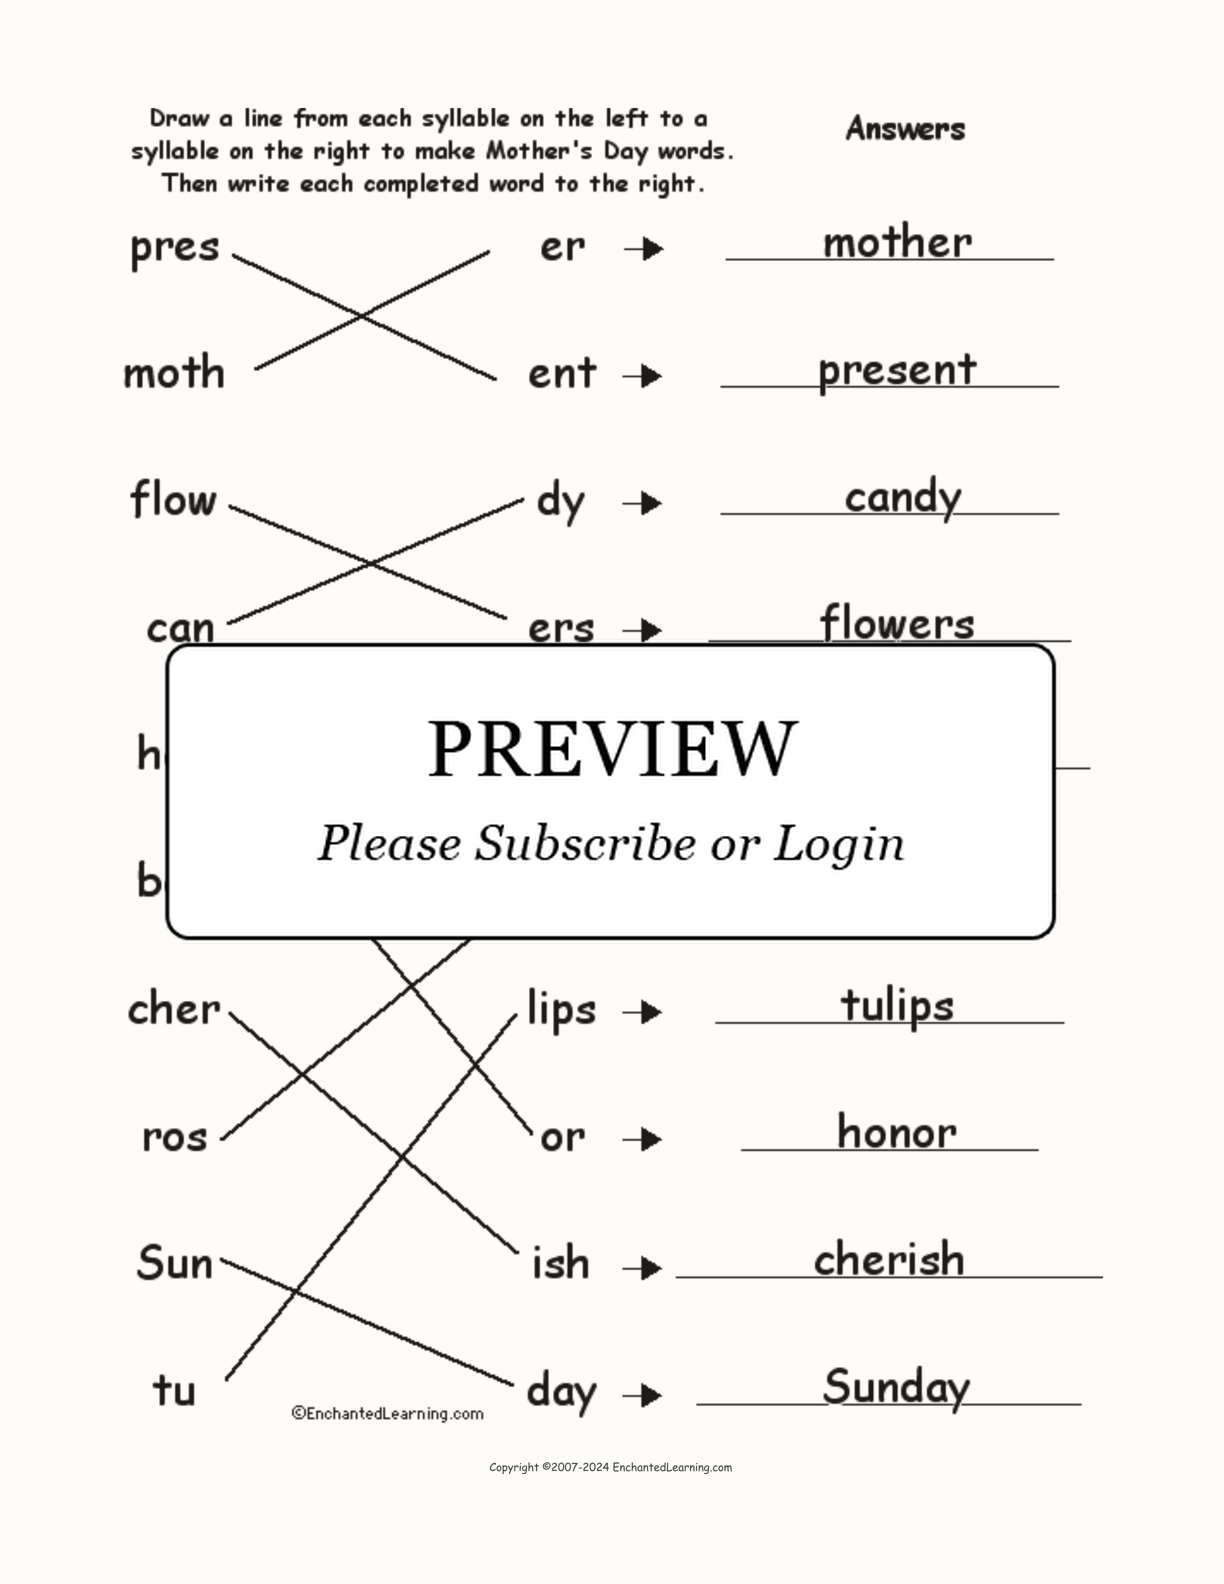 Match the Syllables: Mother's Day Words interactive worksheet page 2